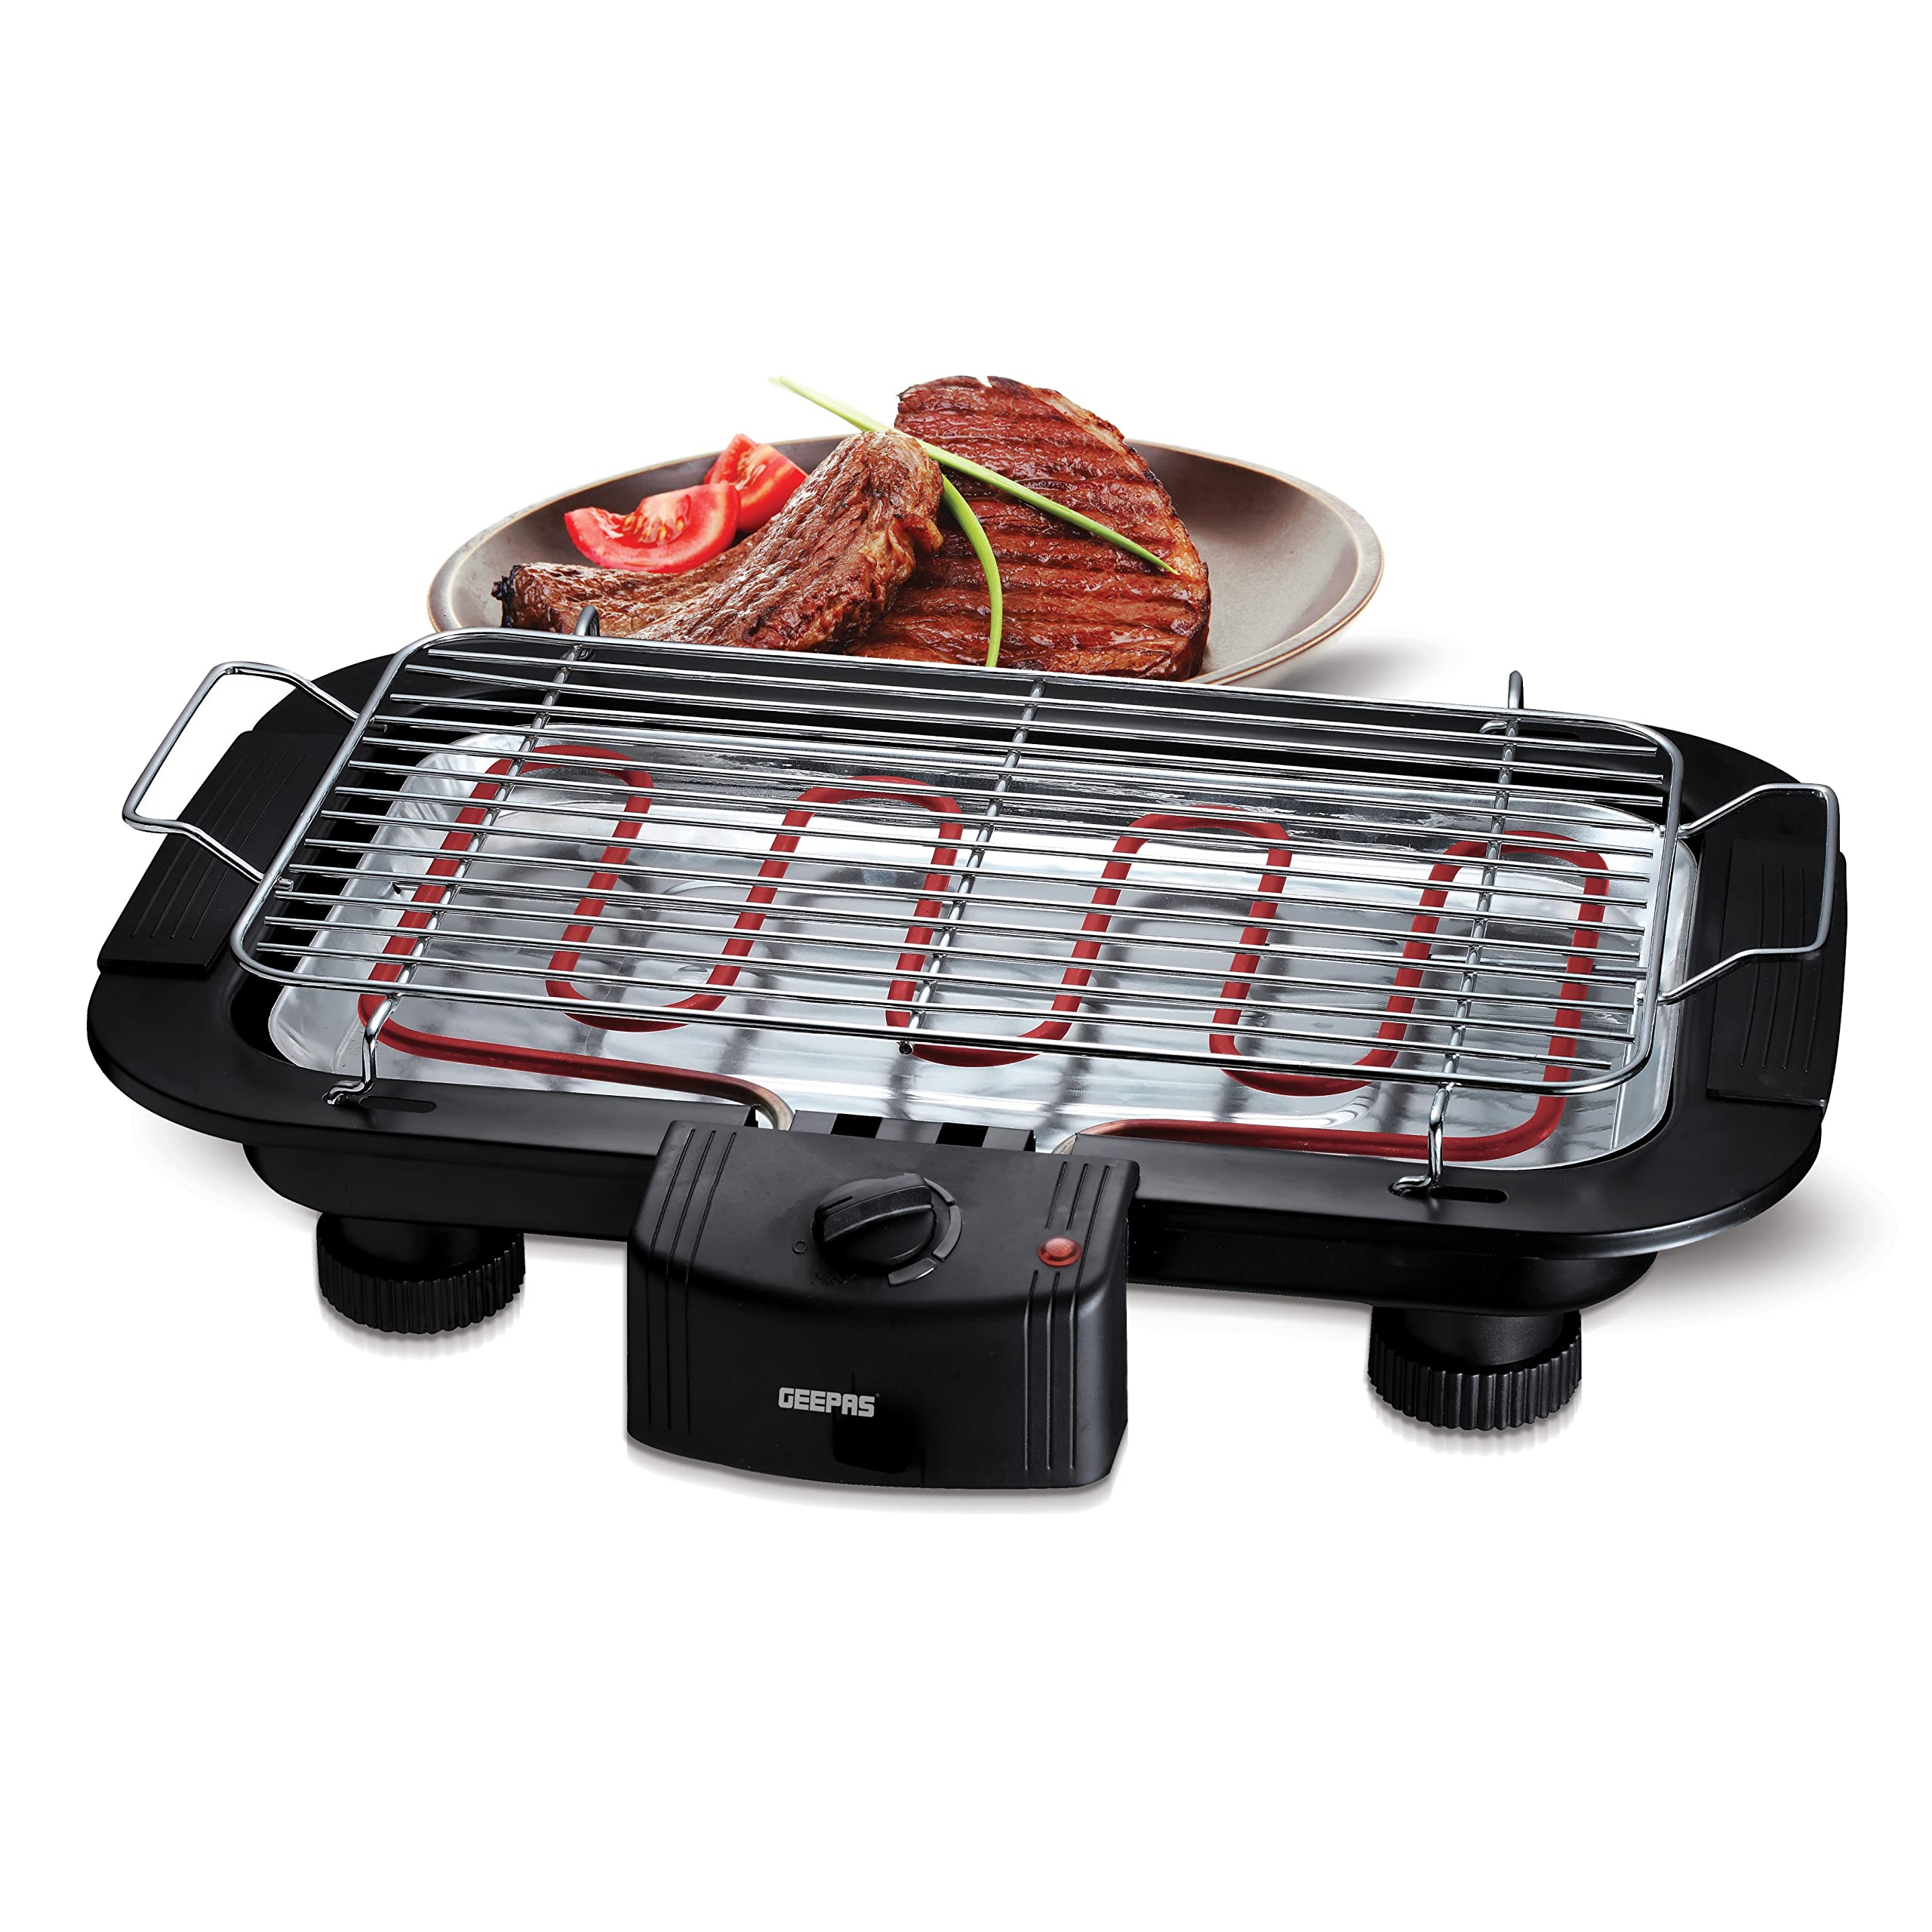 Geepas 2000W Electric Barbecue Grill - Table Grill, Auto-Thermostat Control with Overheat Protection - Space Saving, Detachable Heating Element - 1 Years Warranty